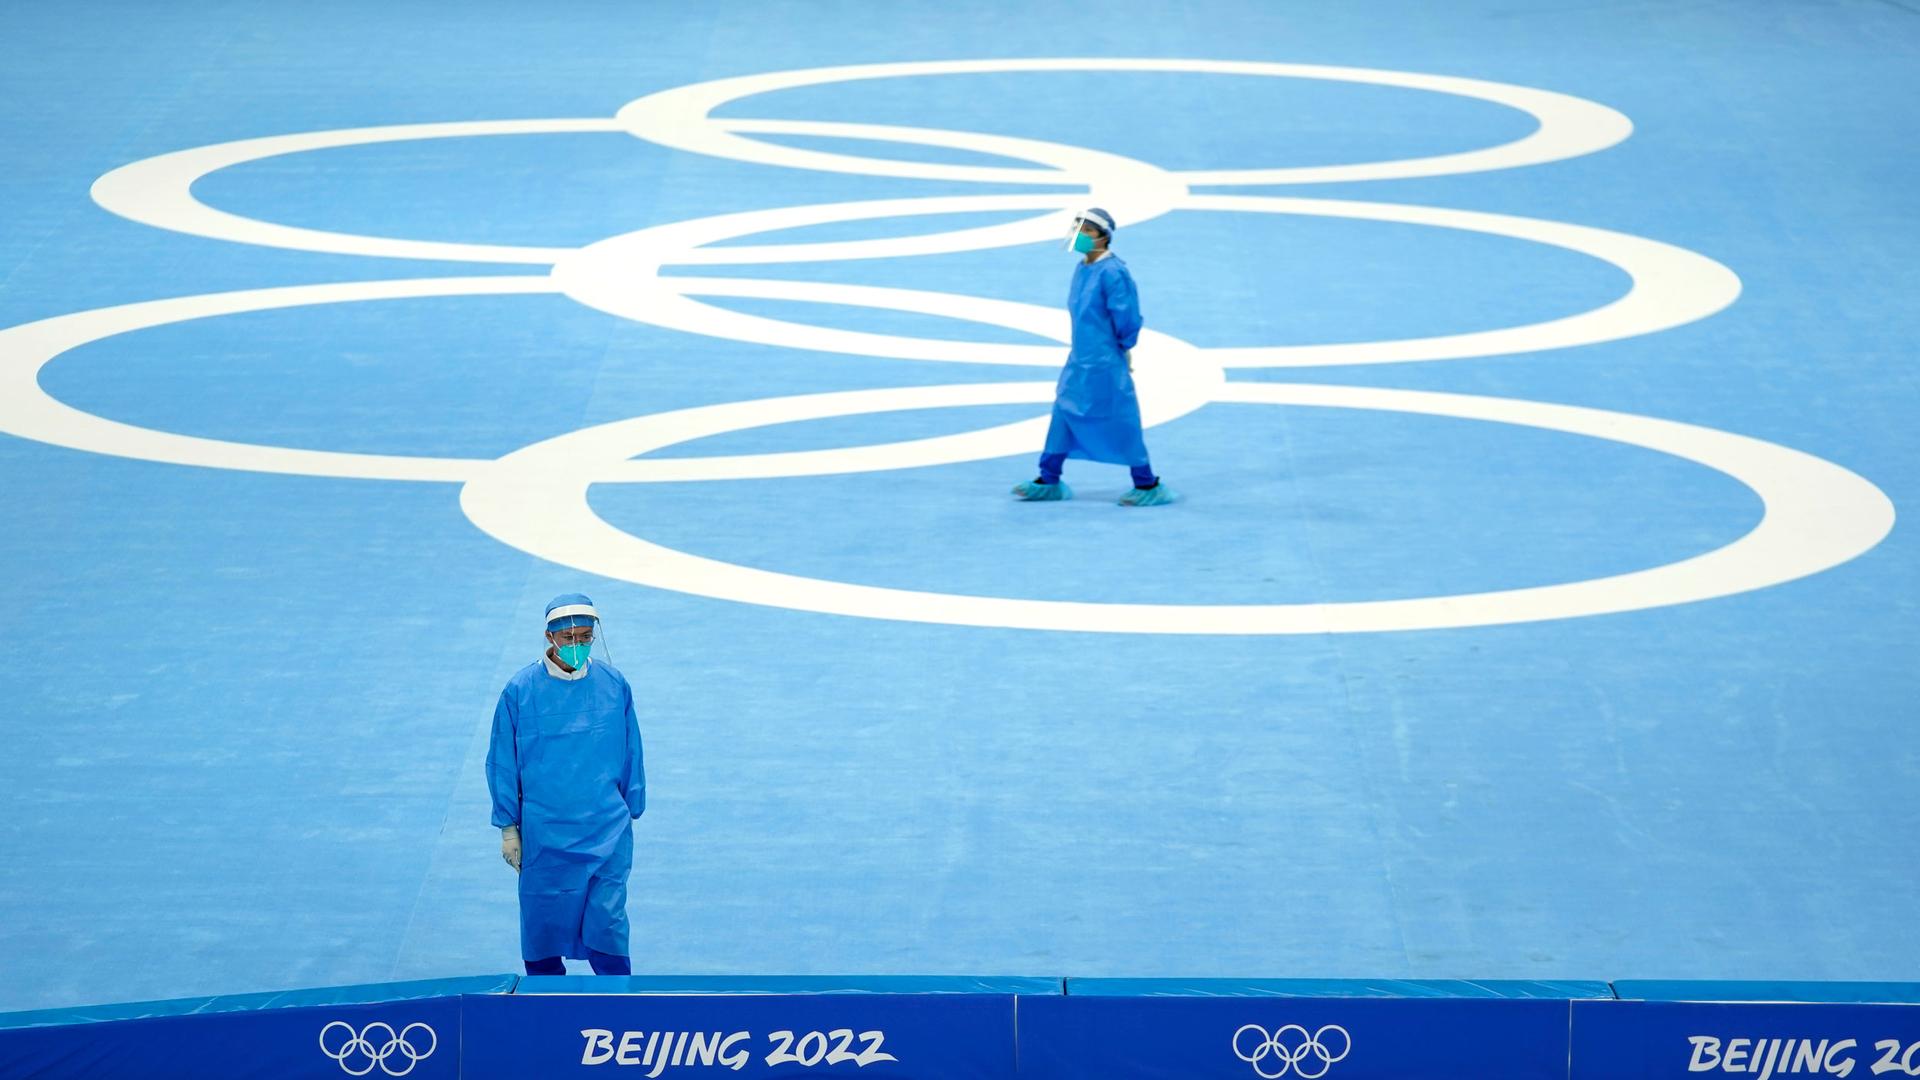 Medical personnel stand ready for activity during a scheduled speedskating practice session inside at the National Speed Skating Oval the 2022 Winter Olympics, Thursday, Jan. 27, 2022, in Beijing.